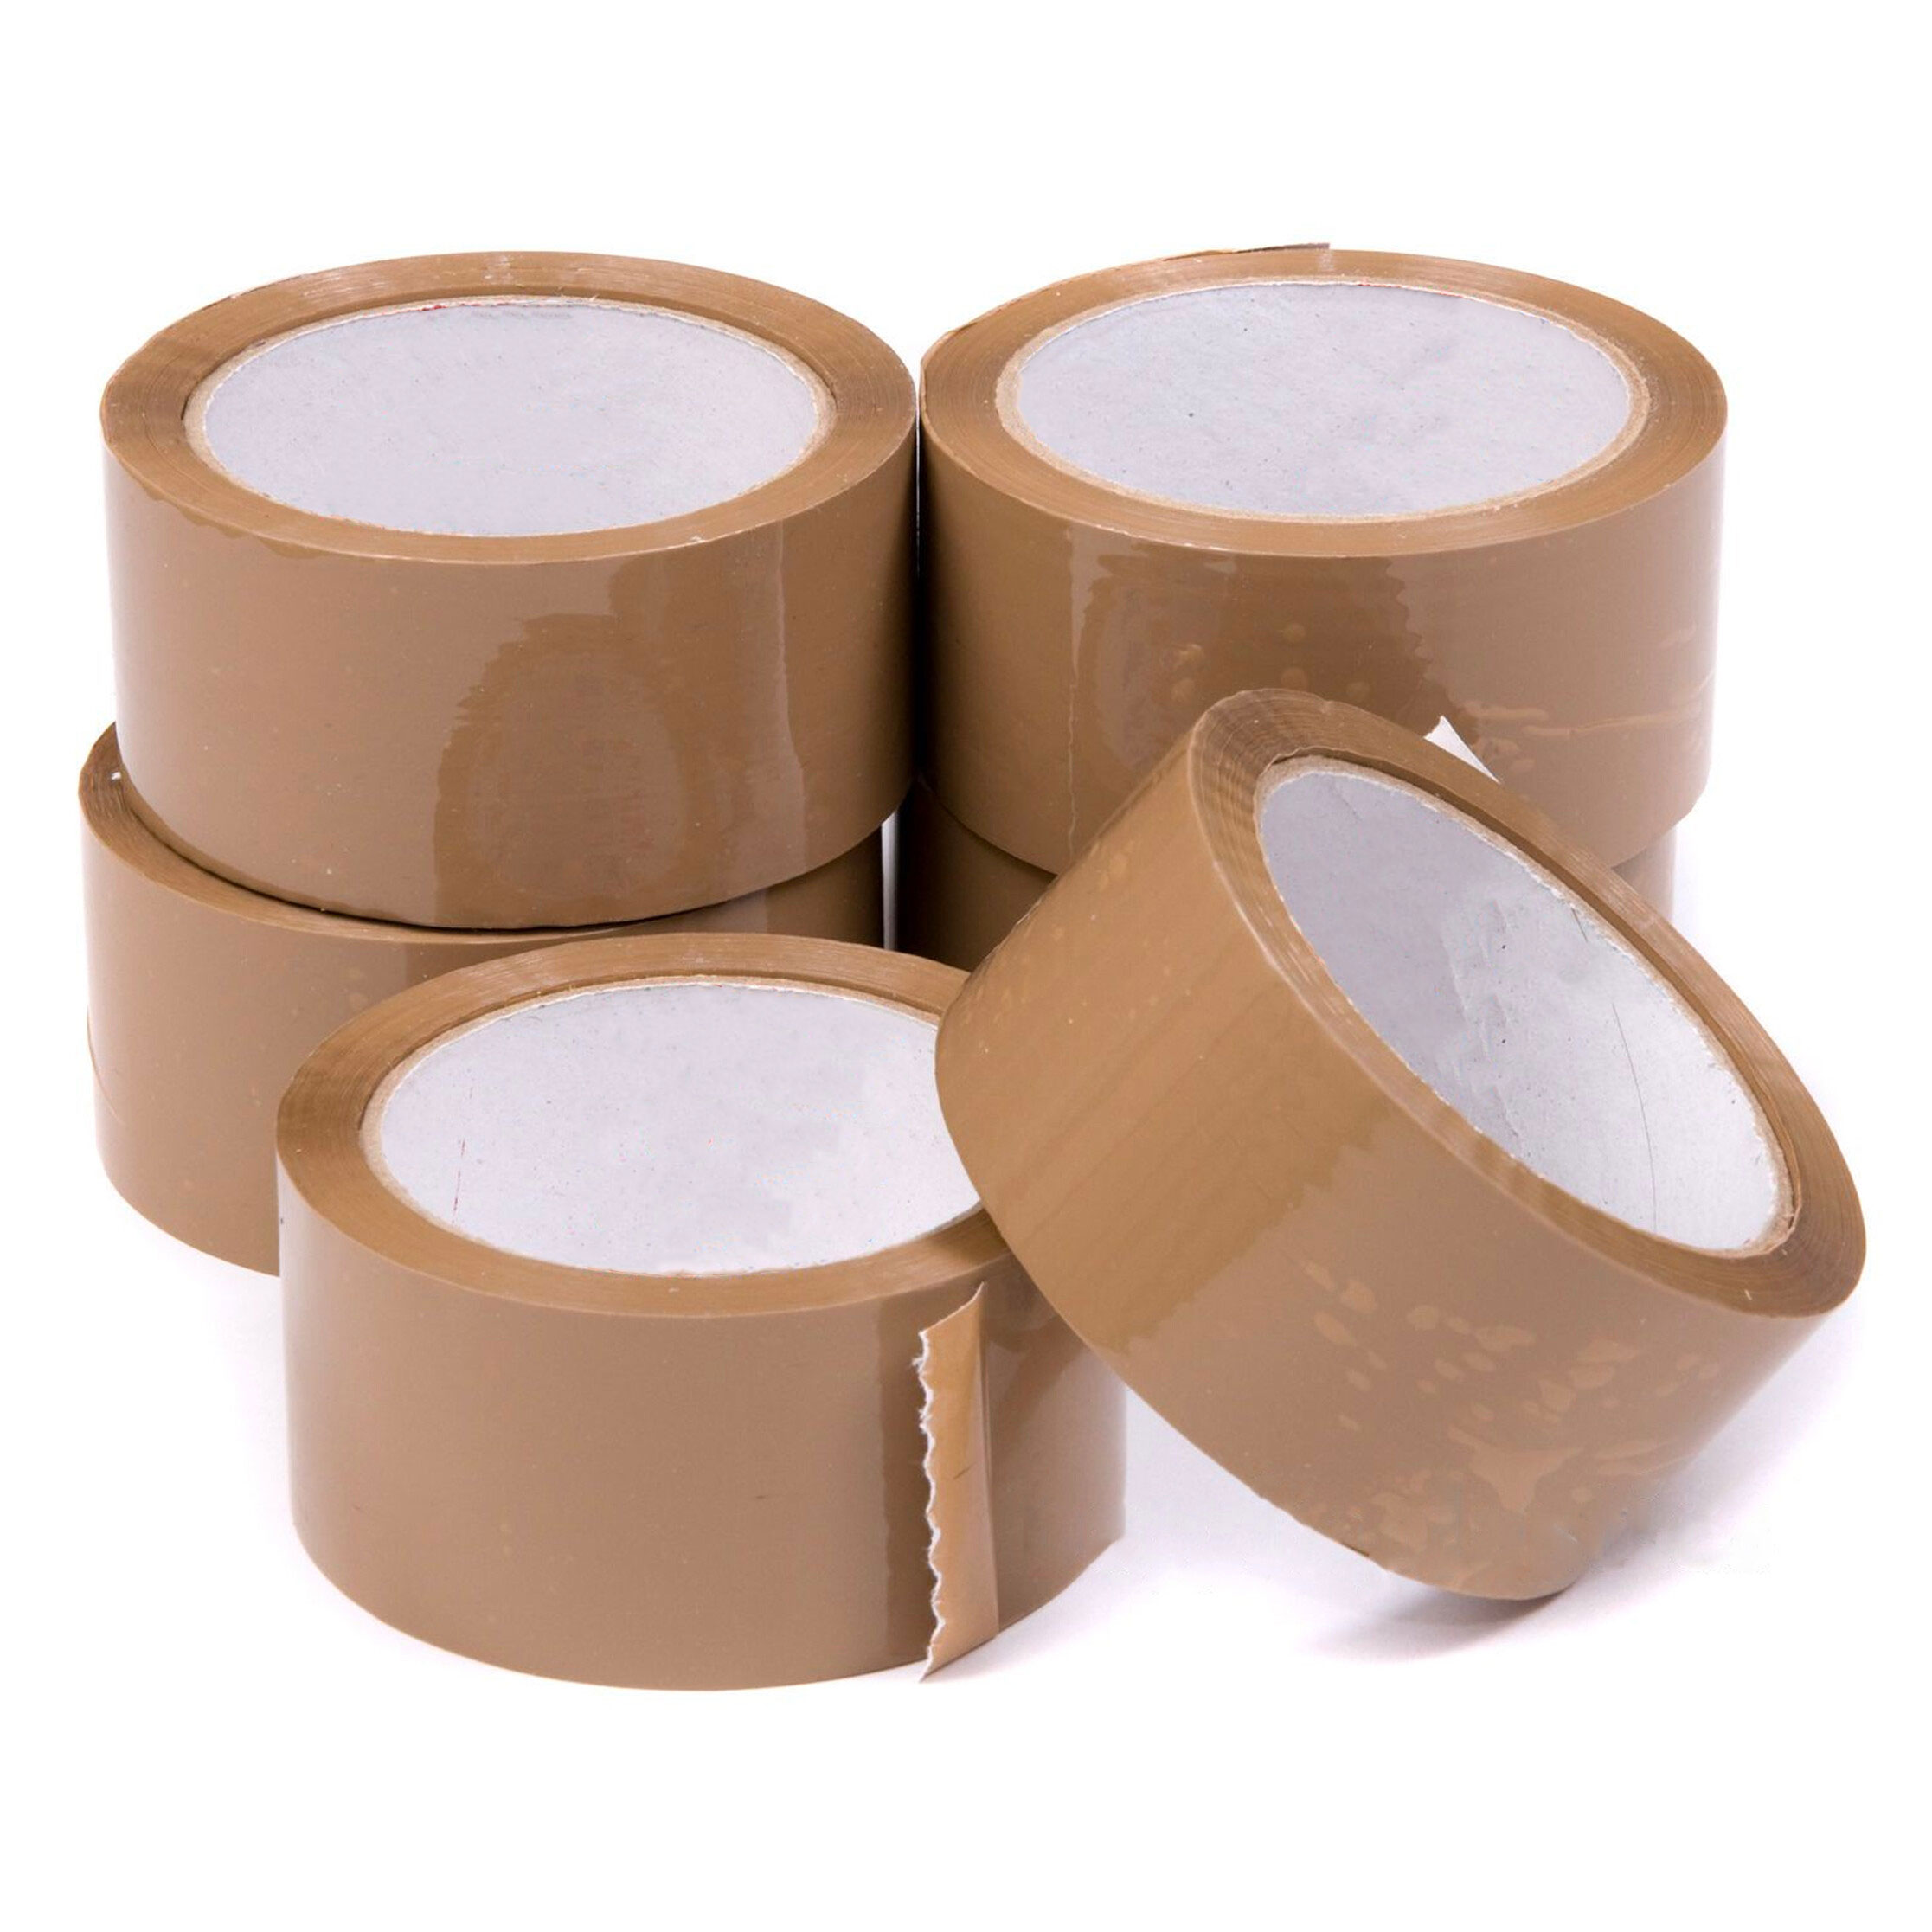 6 Rolls Of Strong Brown Packing Parcel Tape 48mm x 66M 